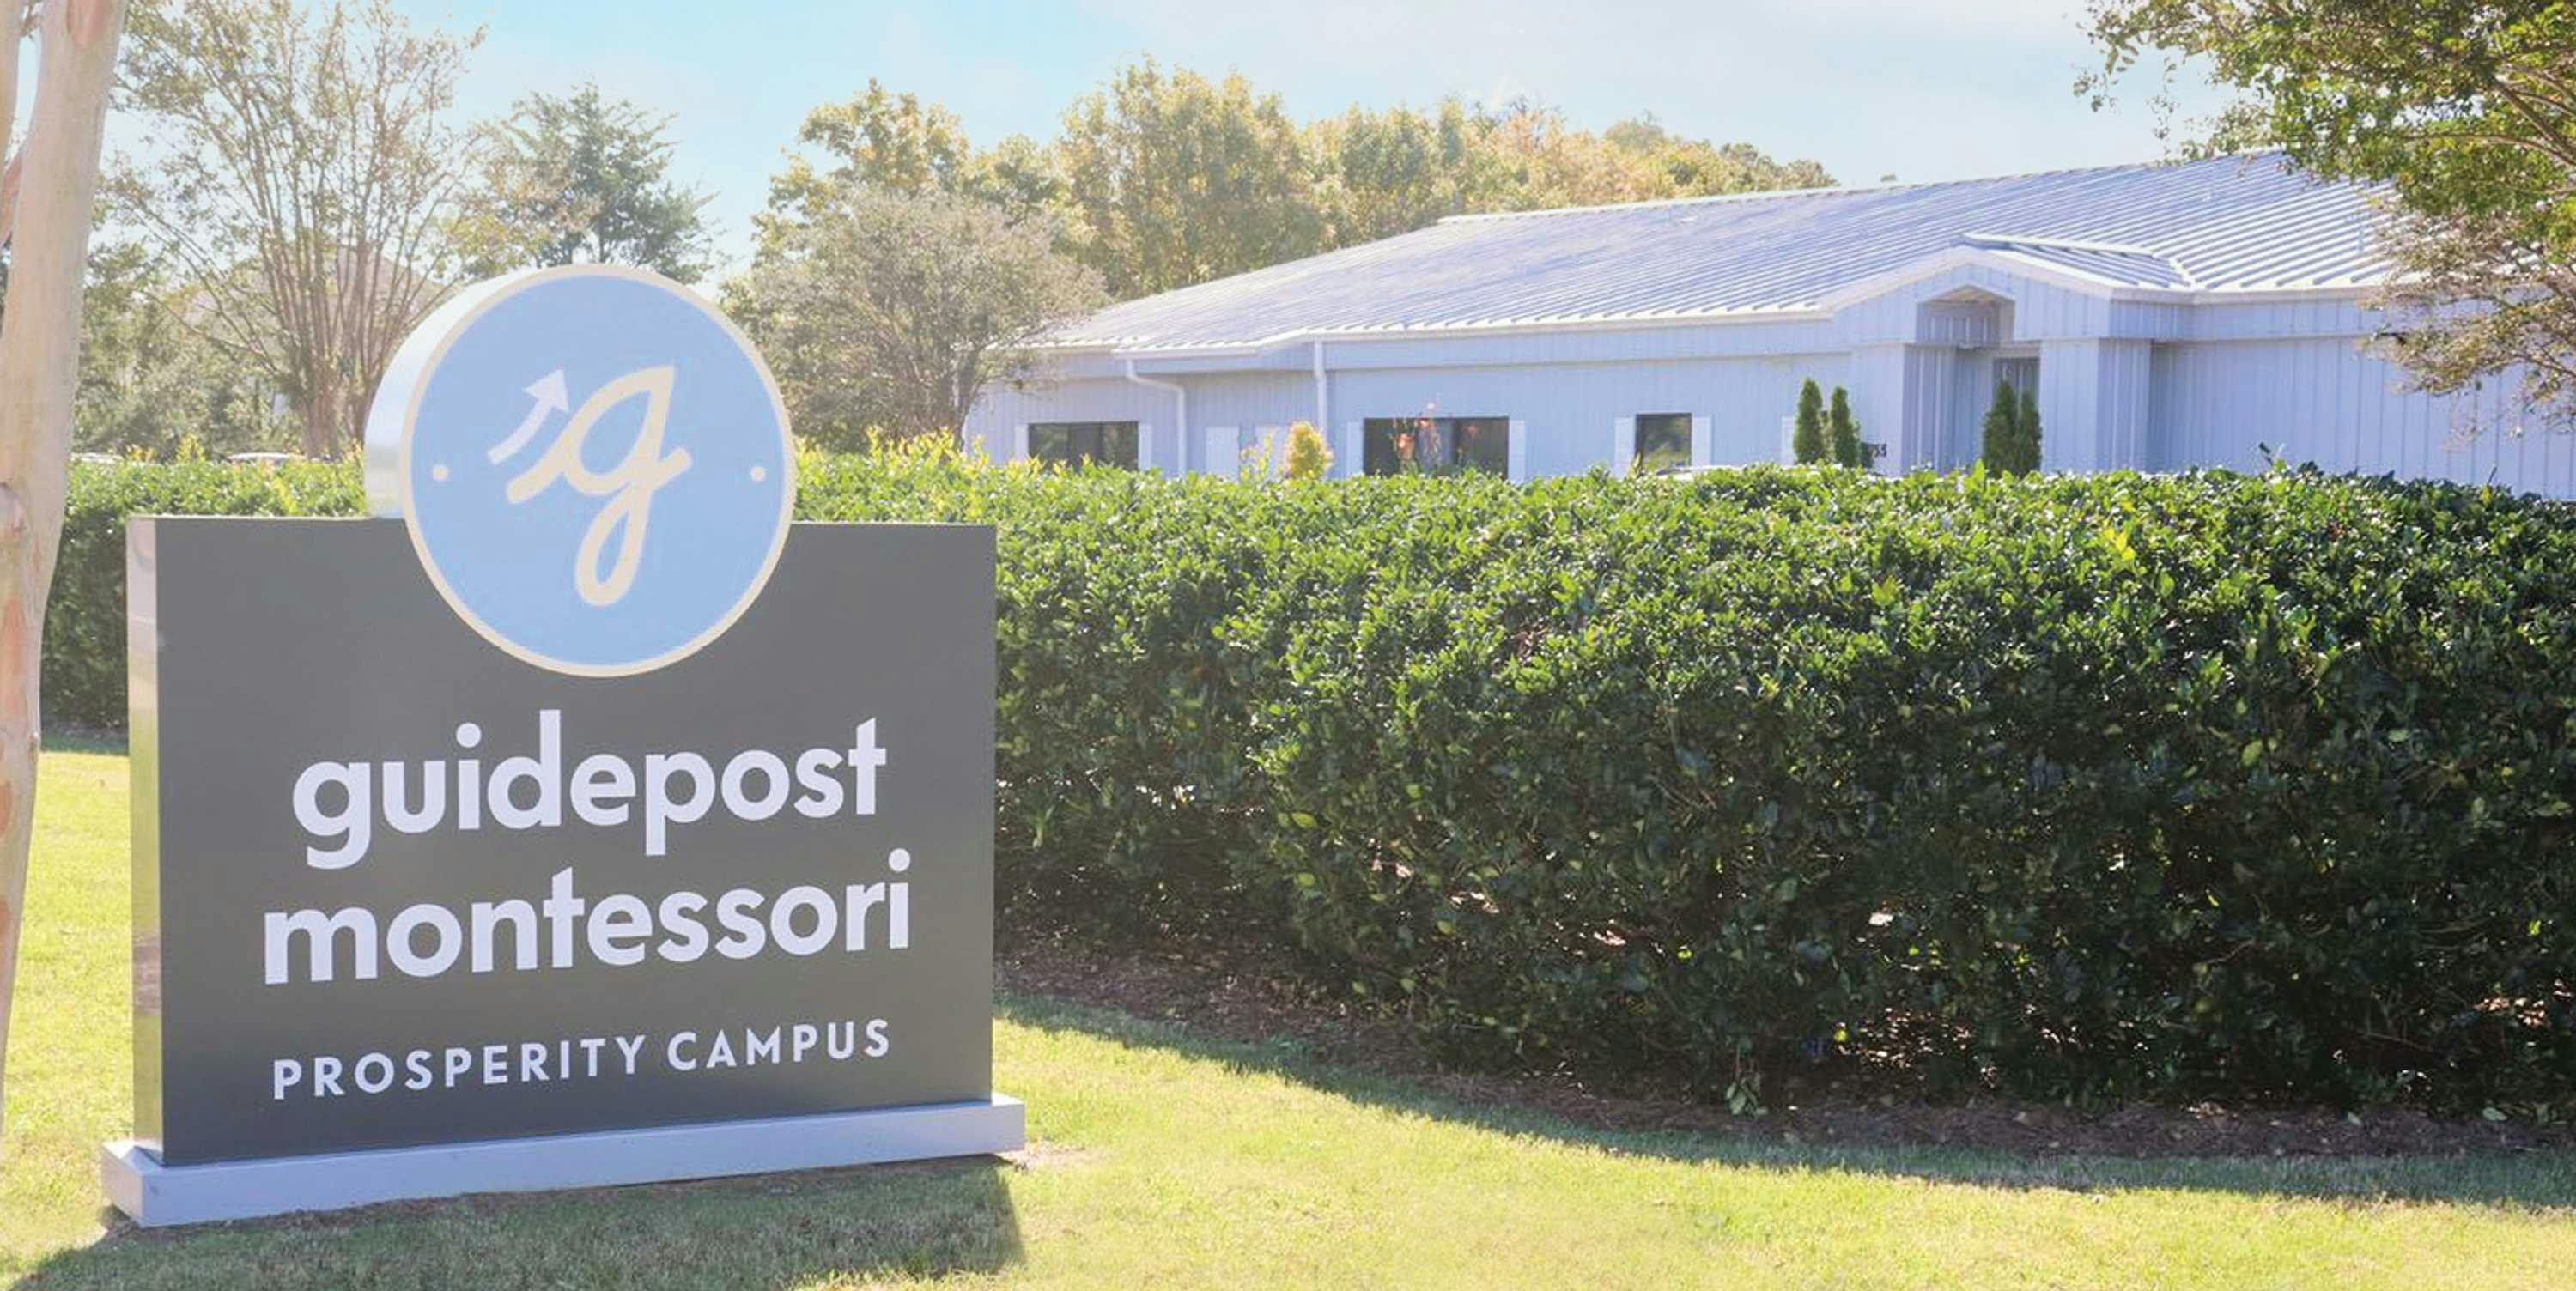 View of Guidepost Montessori at Prosperity from the lawn that shows the top of the campus building over some hedges next to a branded Guidepost Montessori sign that reads "Prosperity Campus"